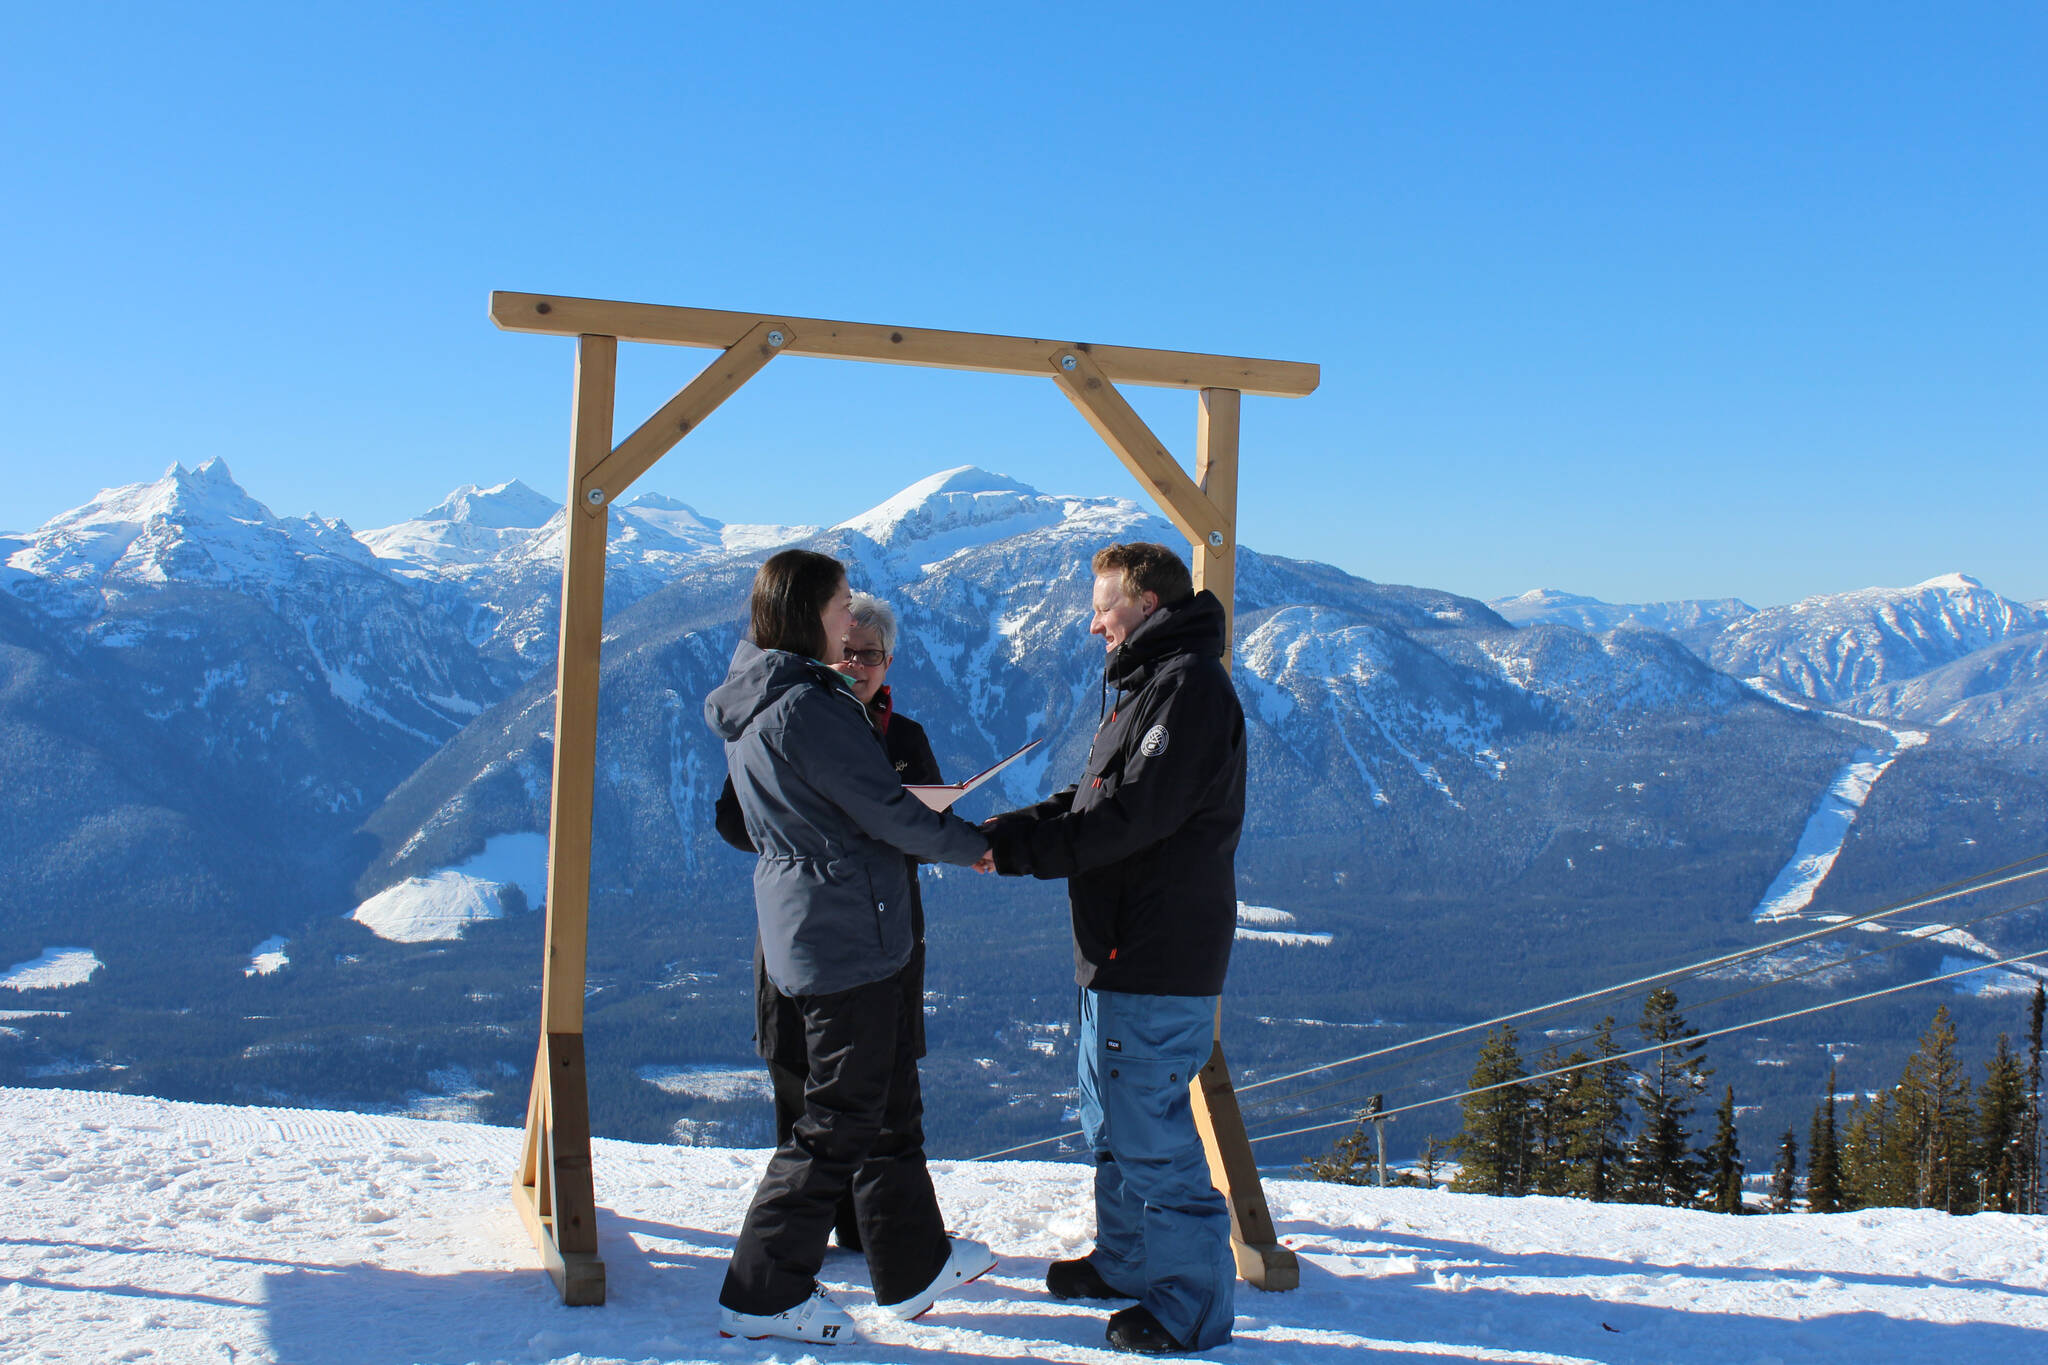 Jason Baertschi and Shianne Lewang spent a decade on the slopes and skied down after tying the knot.